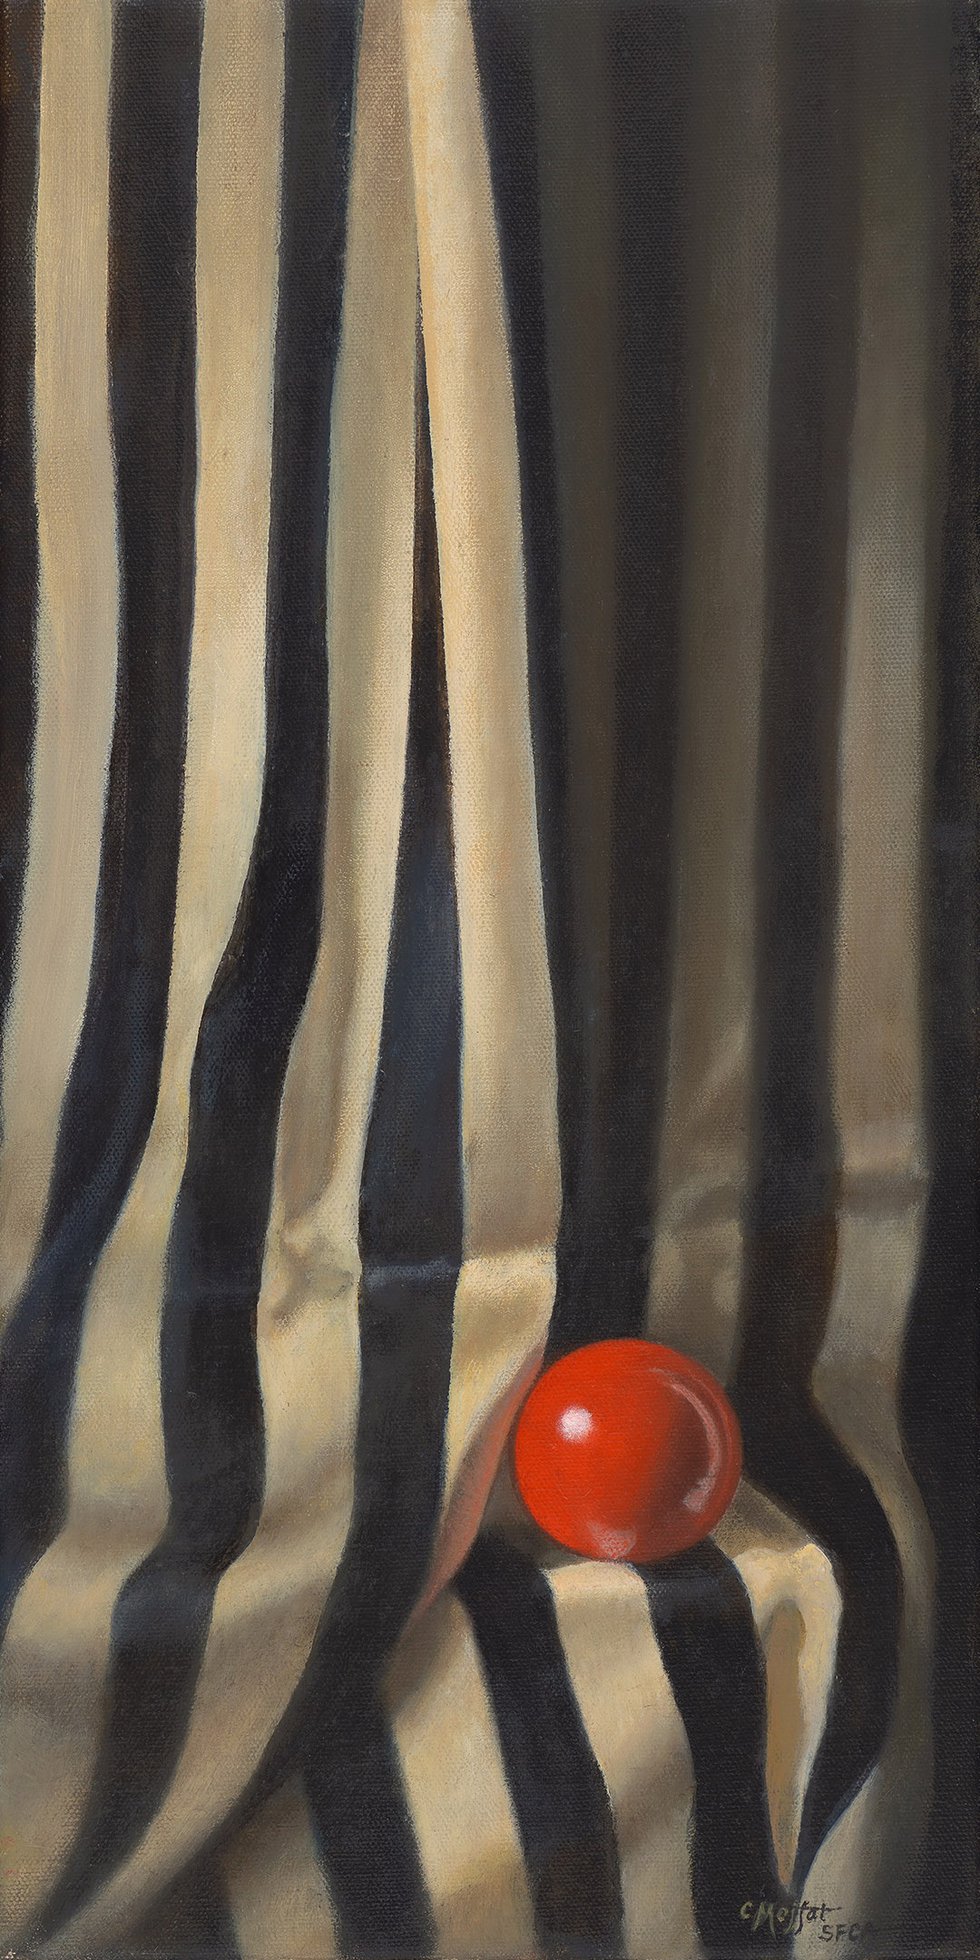 Catherine Moffat, "Solitary Red Ball in Stripes," 2021